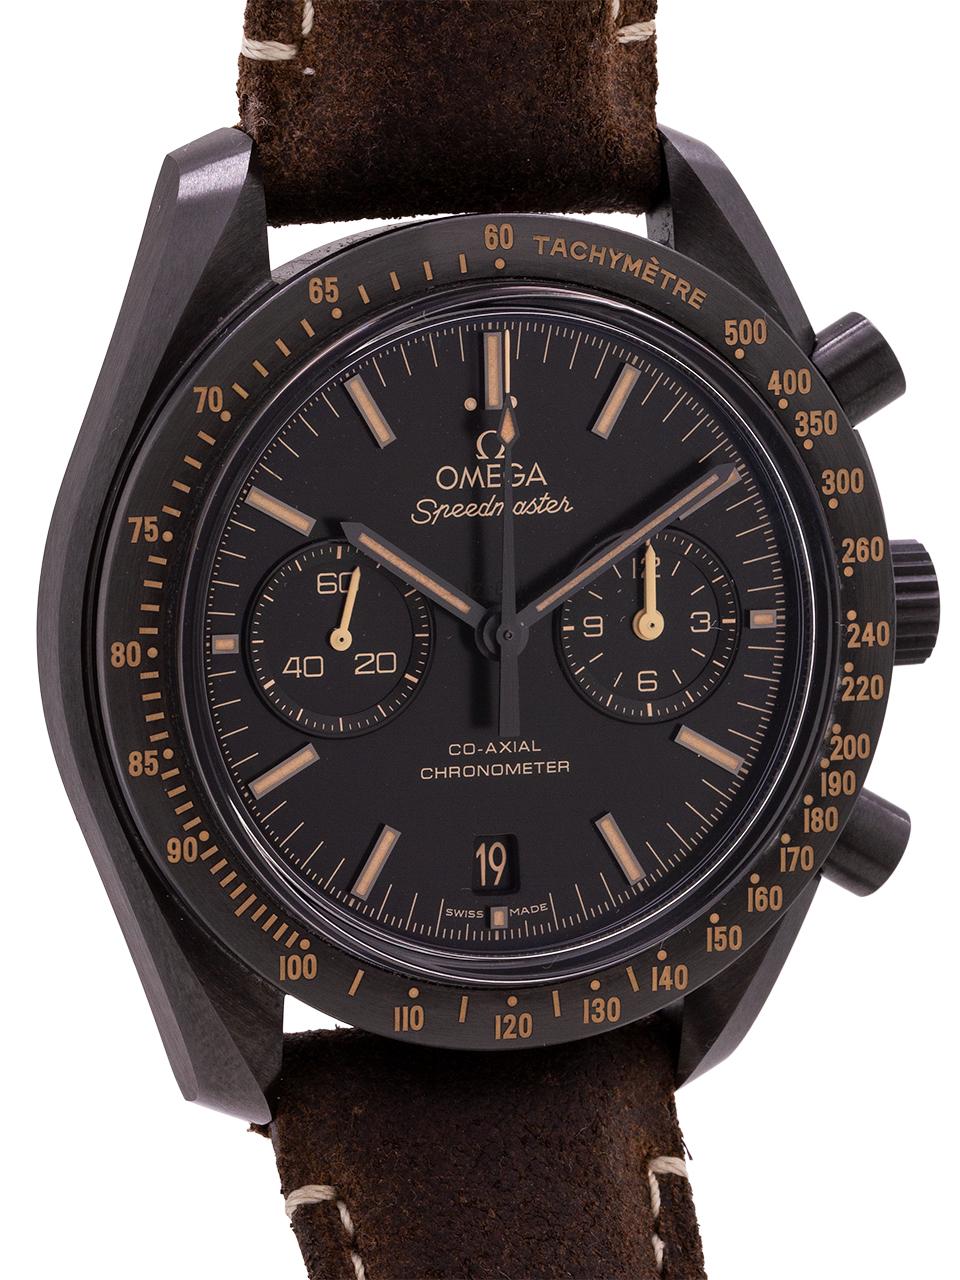 
Omega Speedmaster Dark Side of the Moon “Vintage Black”. The Vintage Black is one of the variations of this famous Speedmaster family. With a 44.25mm fully ceramic case, ceramic dial and bezel, this watch is a dark and refreshing version of the